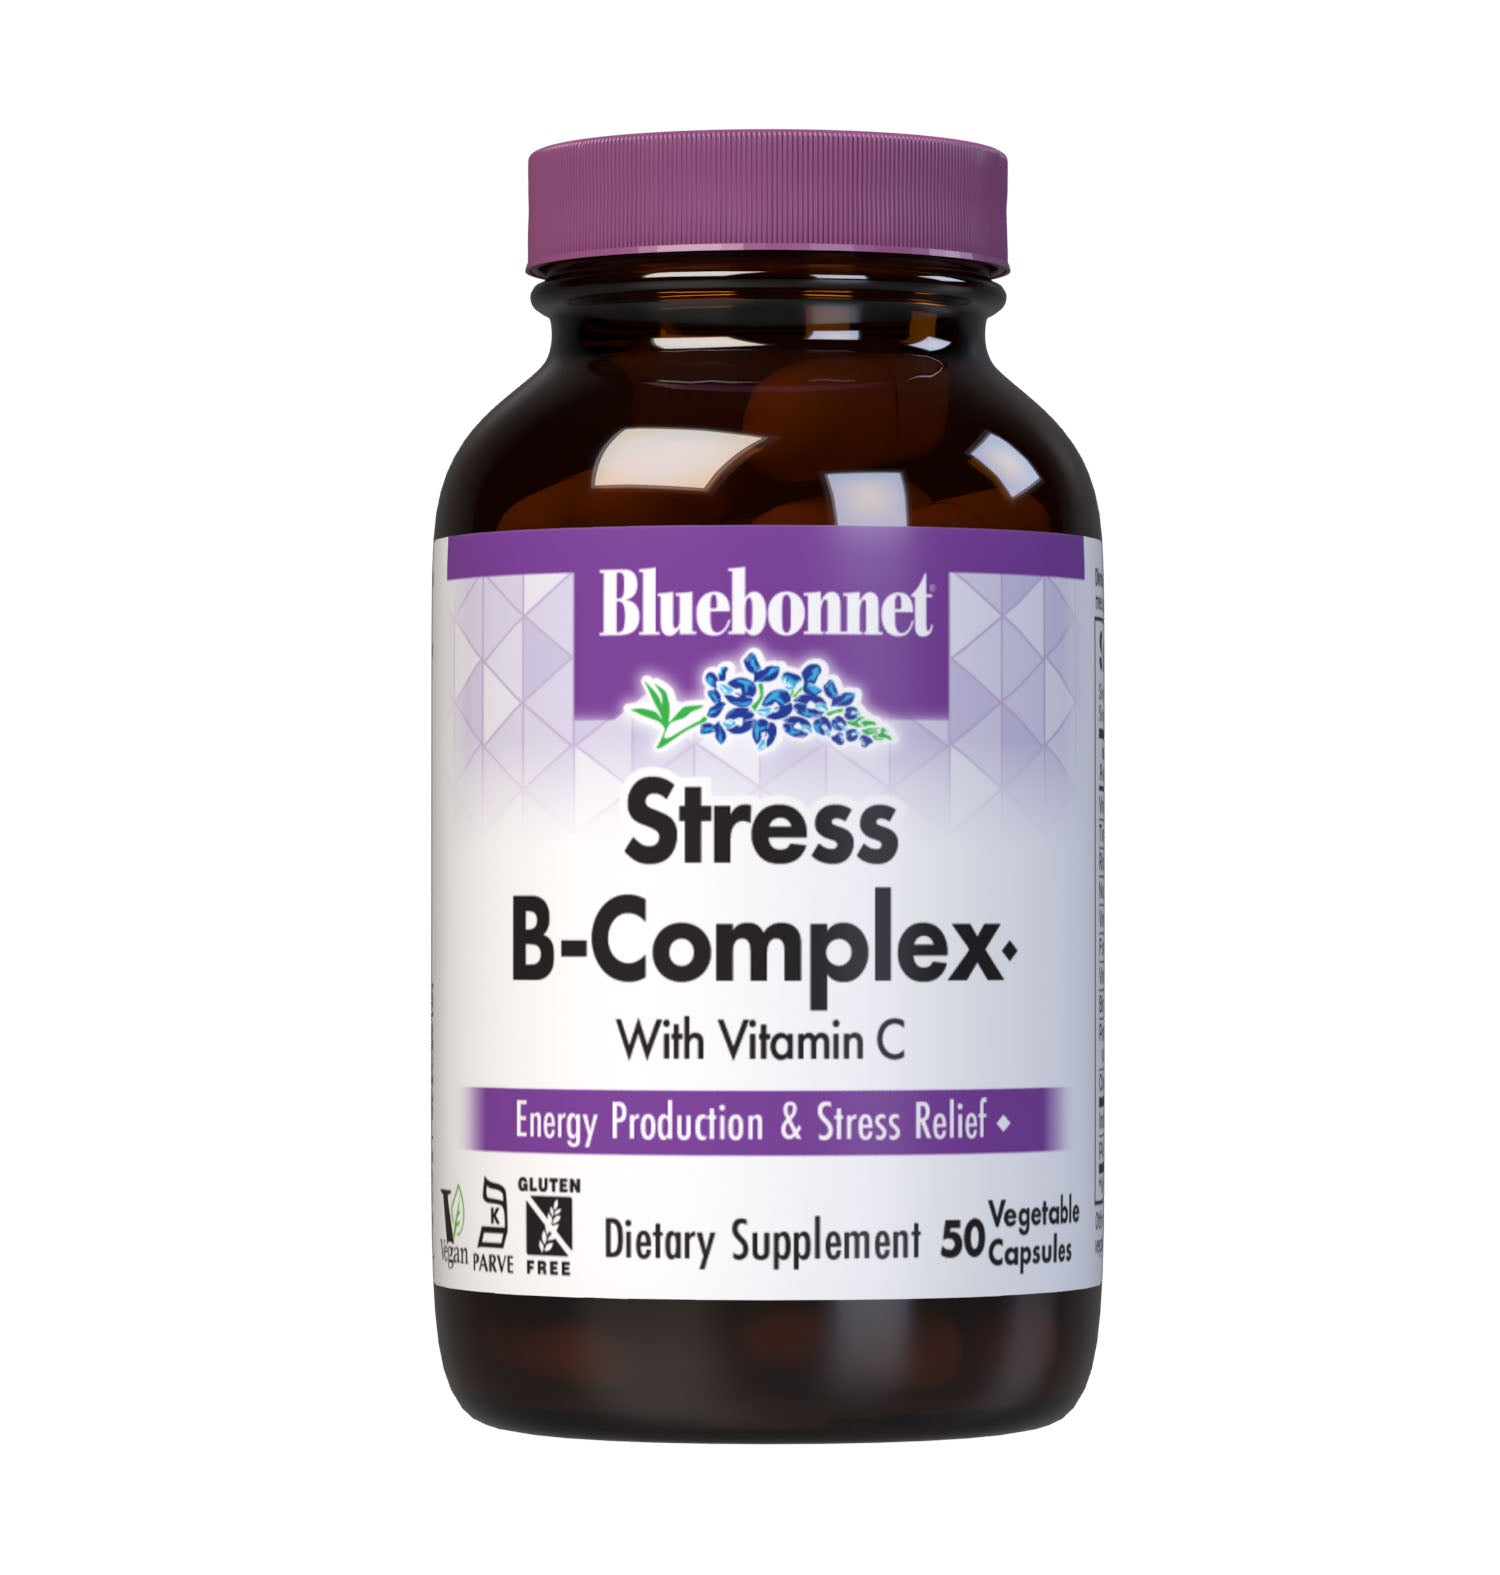 Bluebonnet’s Stress B-Complex Vegetable Capsules are formulated with a full spectrum of high potency B vitamins as well as vitamin C from L-ascorbic acid which play a complementary role in maintaining physiologic and metabolic functions that support energy production and nervous system health. #size_50 count